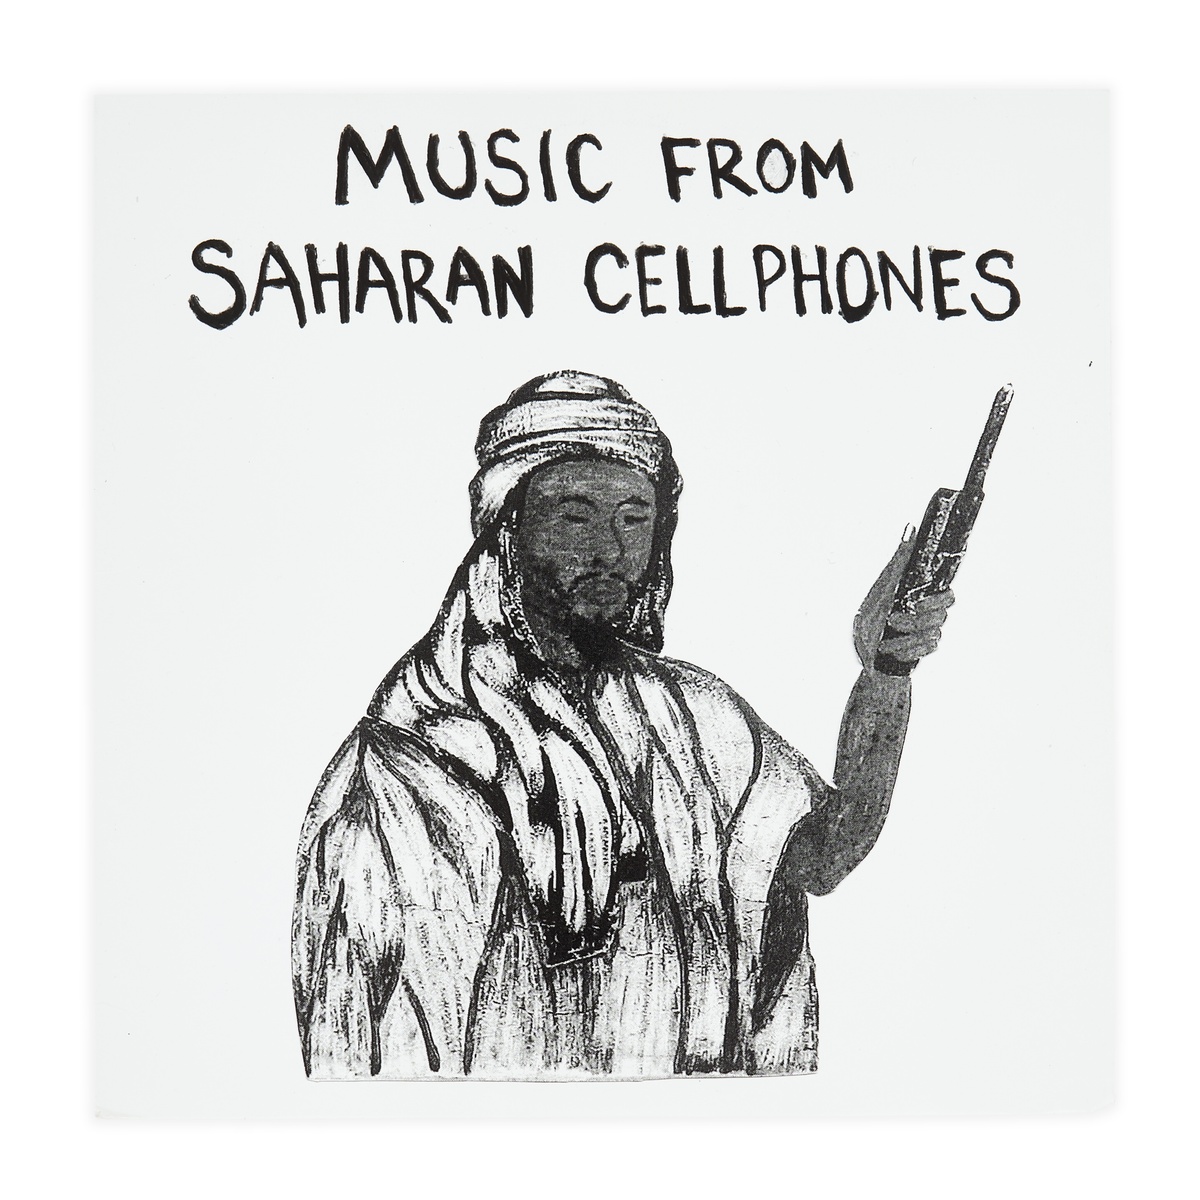 Photograph of the cover of Sahel Sounds' 12" vinyl record 'Music from Saharan Cellphones Vol. 1'.
